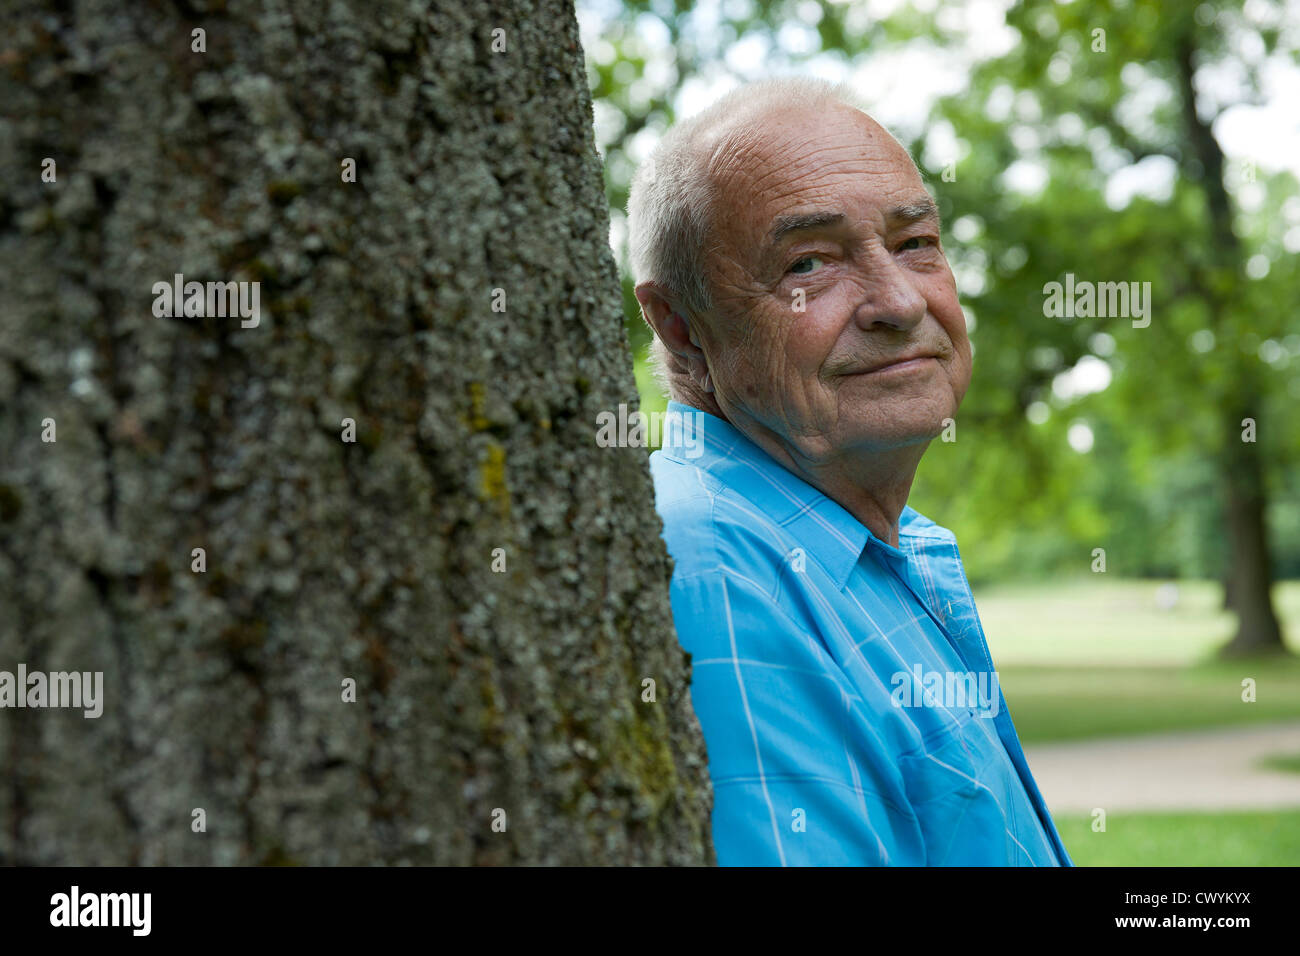 Old man at tree trunk, portrait Stock Photo